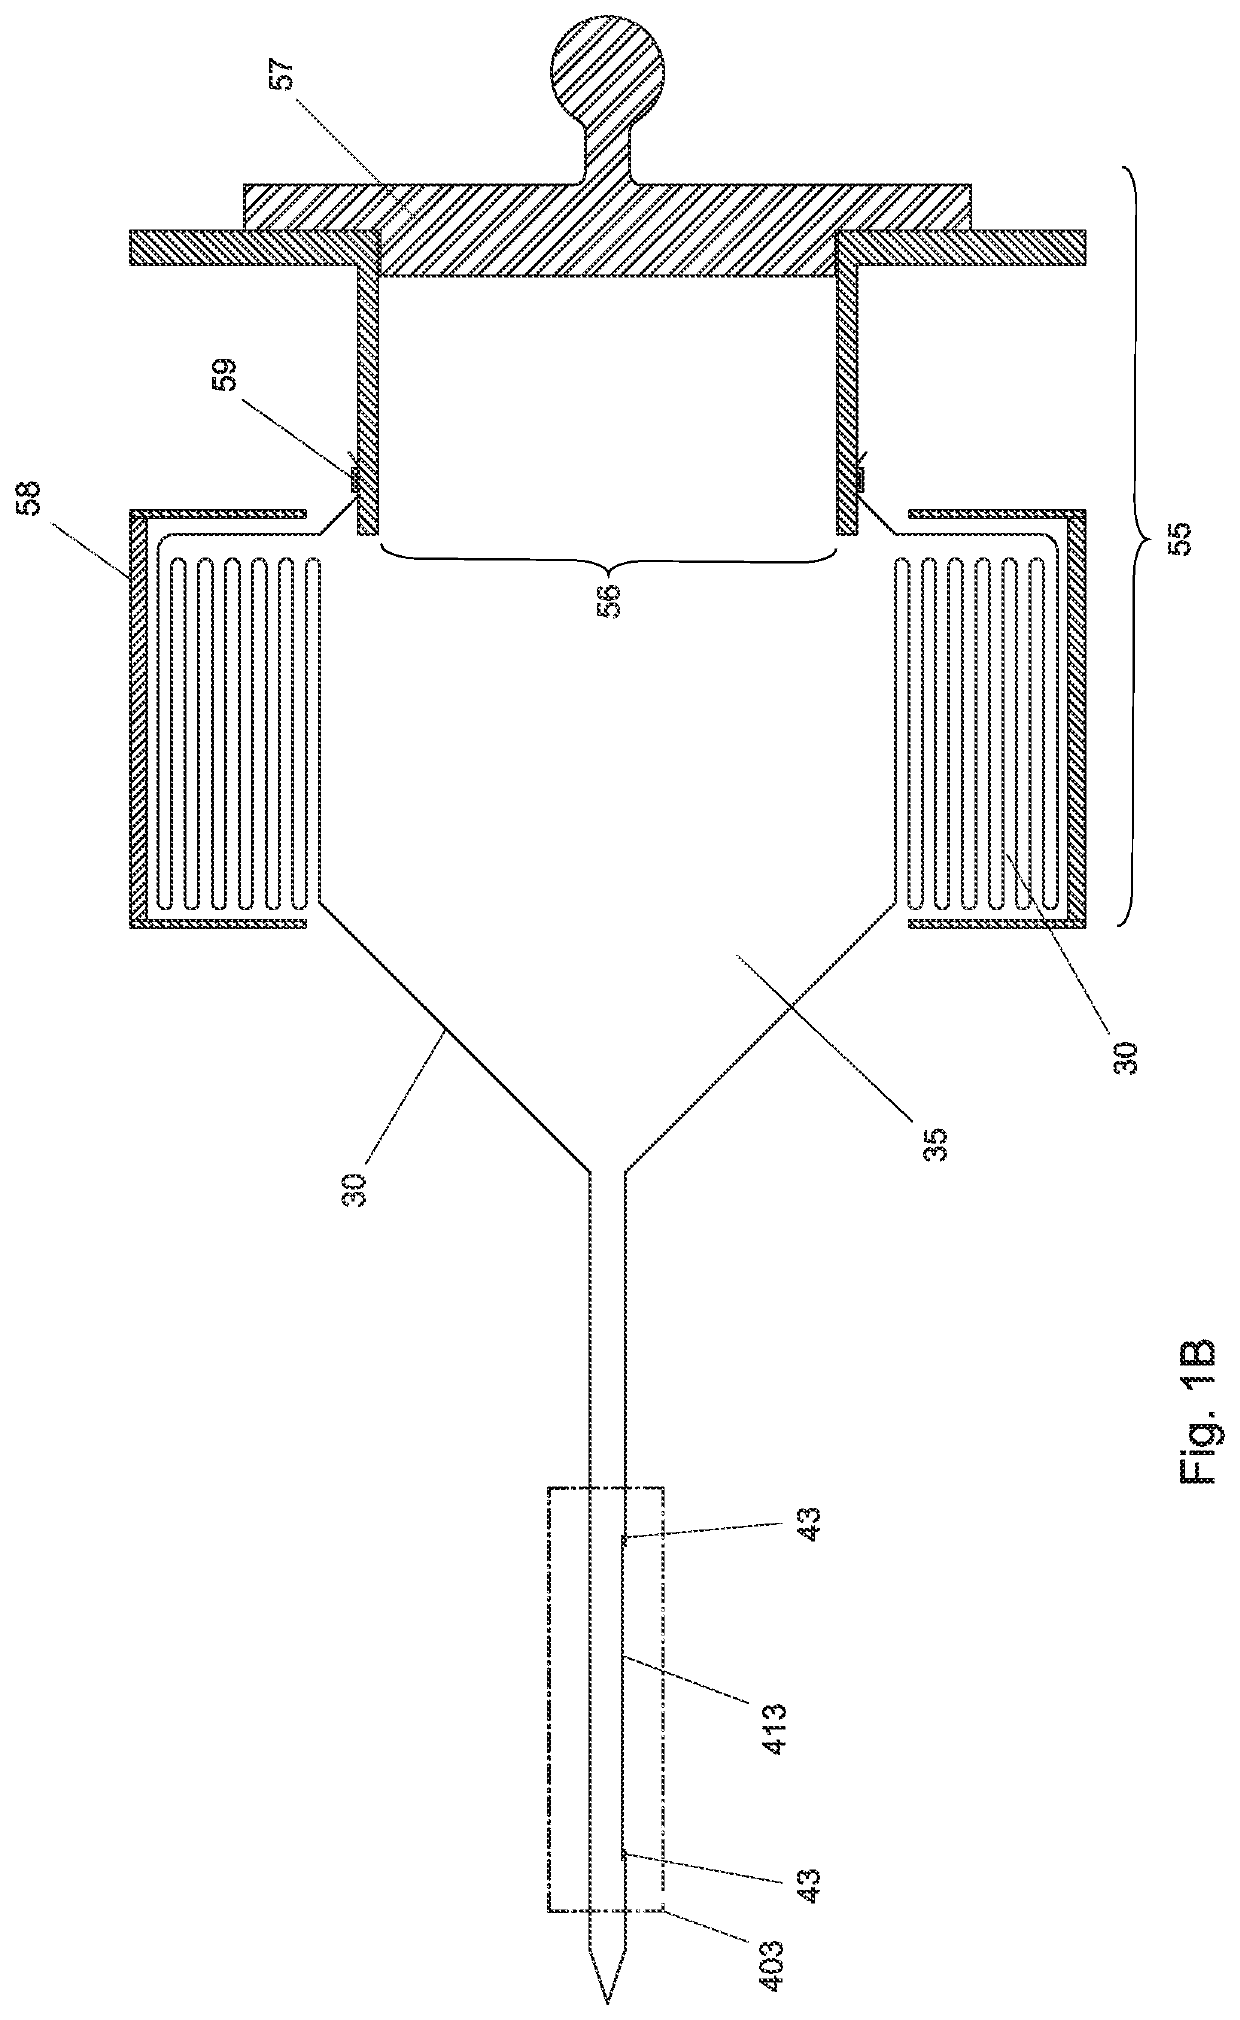 Method and device for creating an environmentally sealed connection between two regions